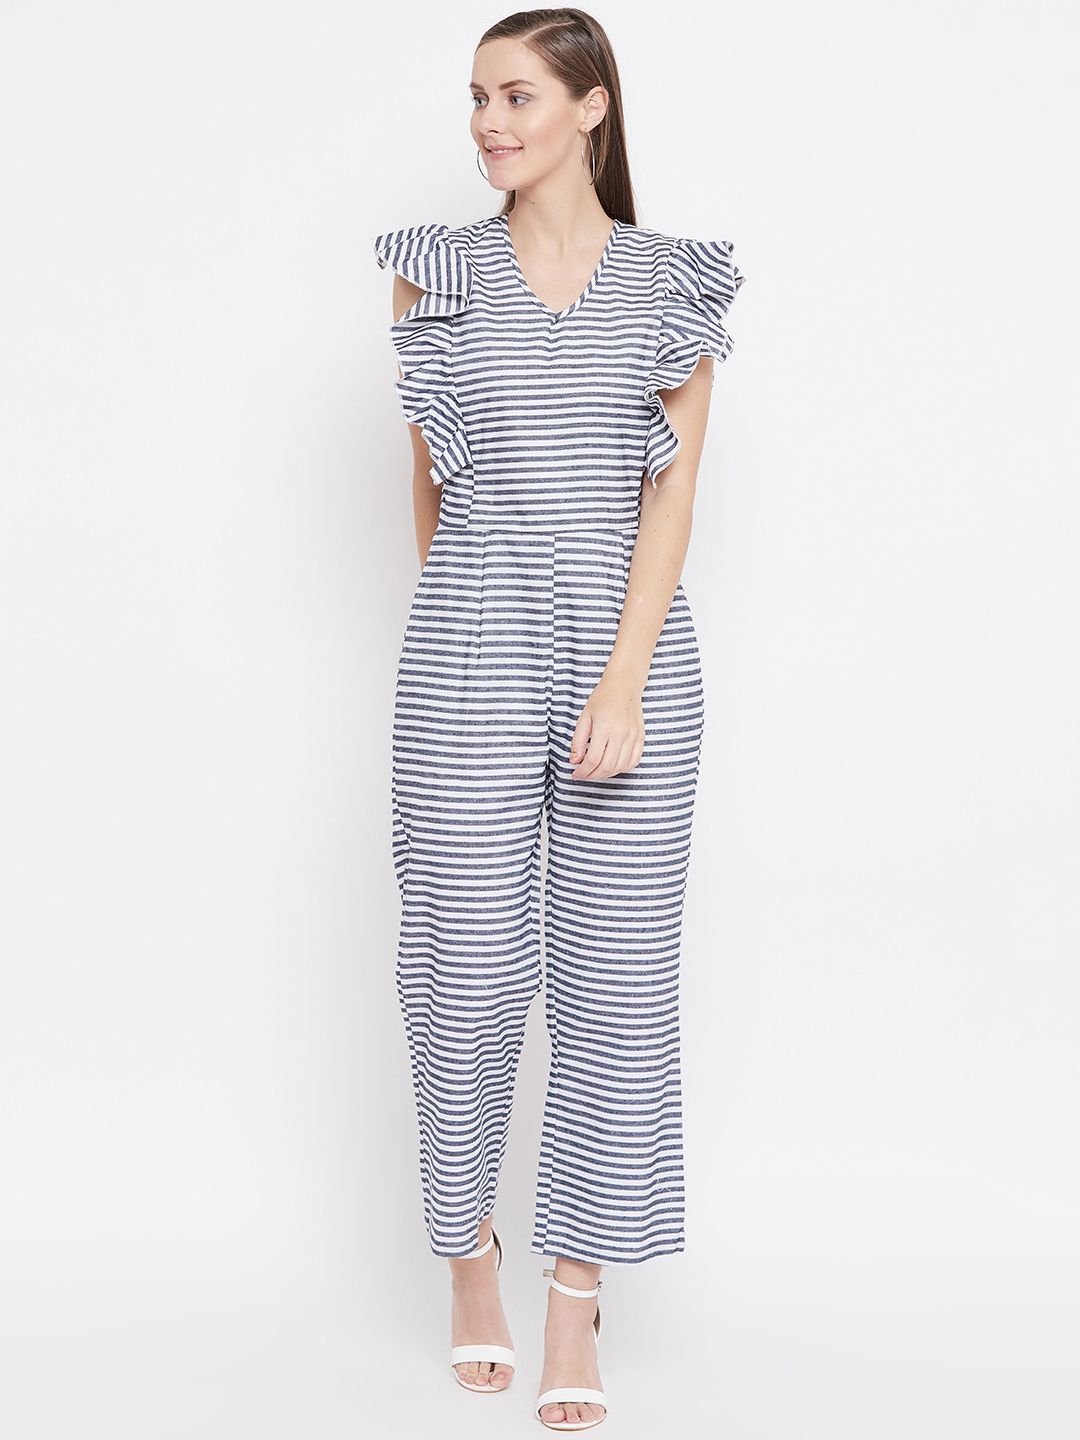 Belle Fille Women White & Navy Blue Striped Basic Jumpsuit Price in India